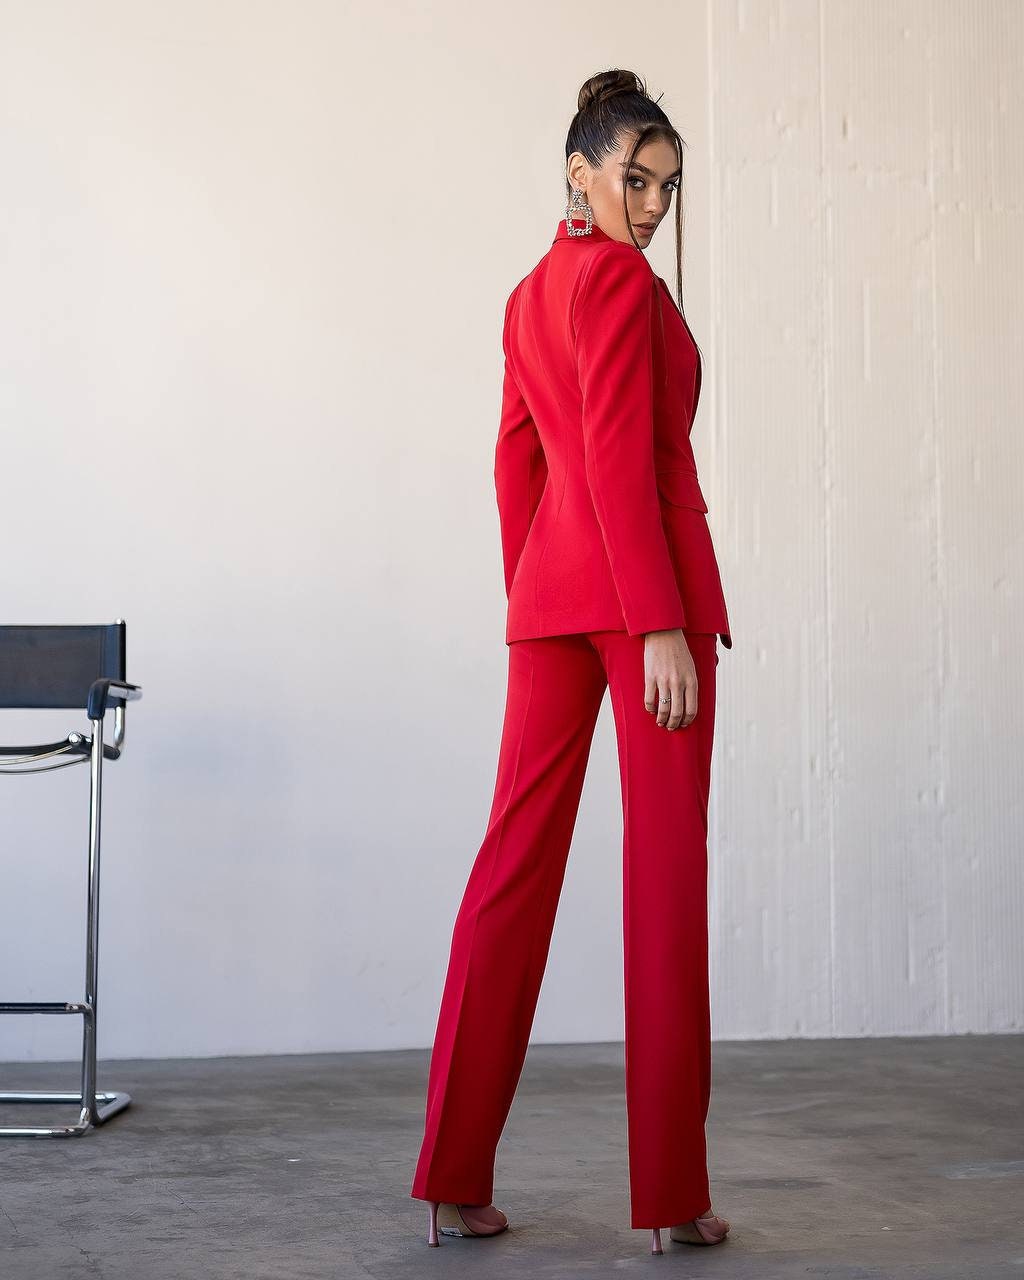 Red Pants Suit Womens, Formal Pantsuit for Women, Chic Womens Pants Suit,  Womens Blazer and Pants Set, Red Blazer Women, Red Womens Suit -  Norway